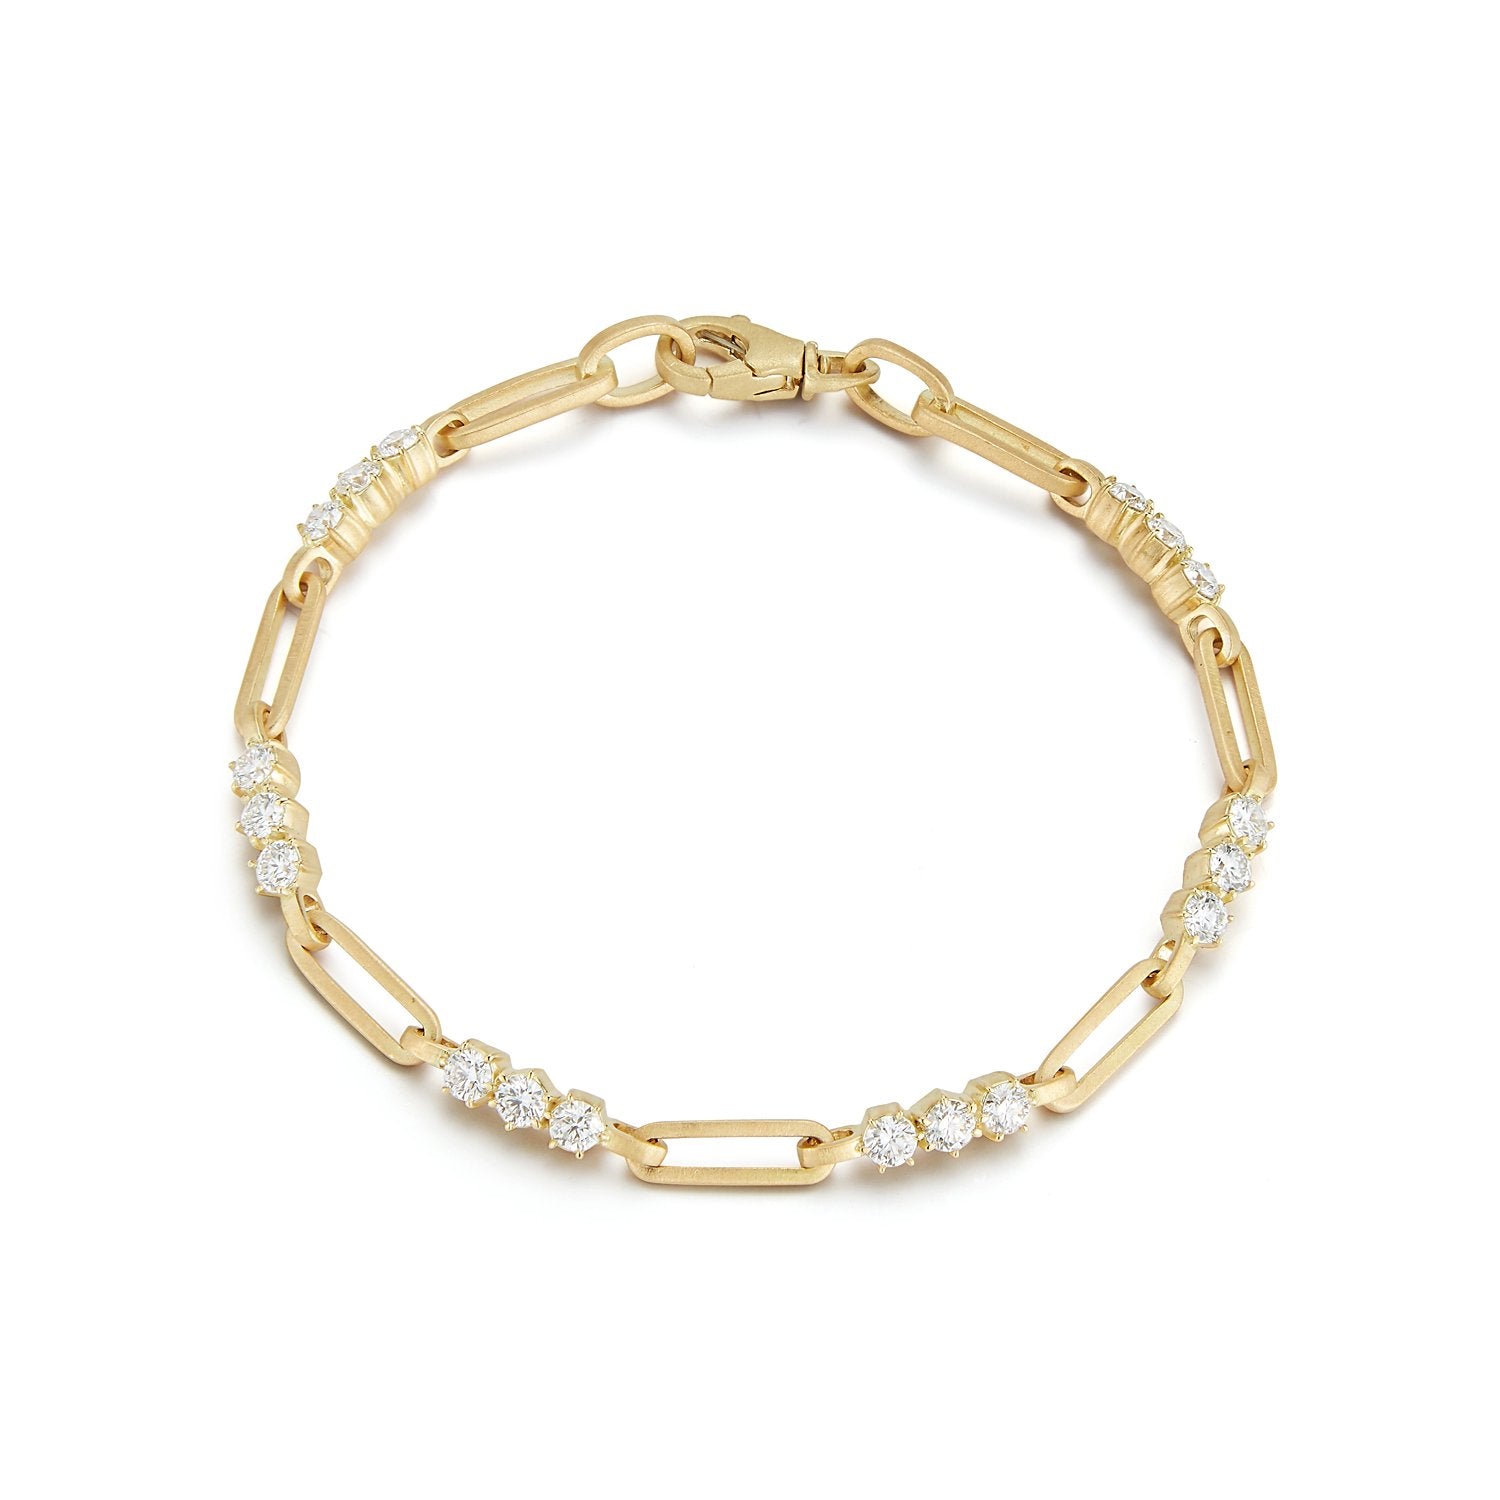 Pia Jewellery - Browse our Complete Range